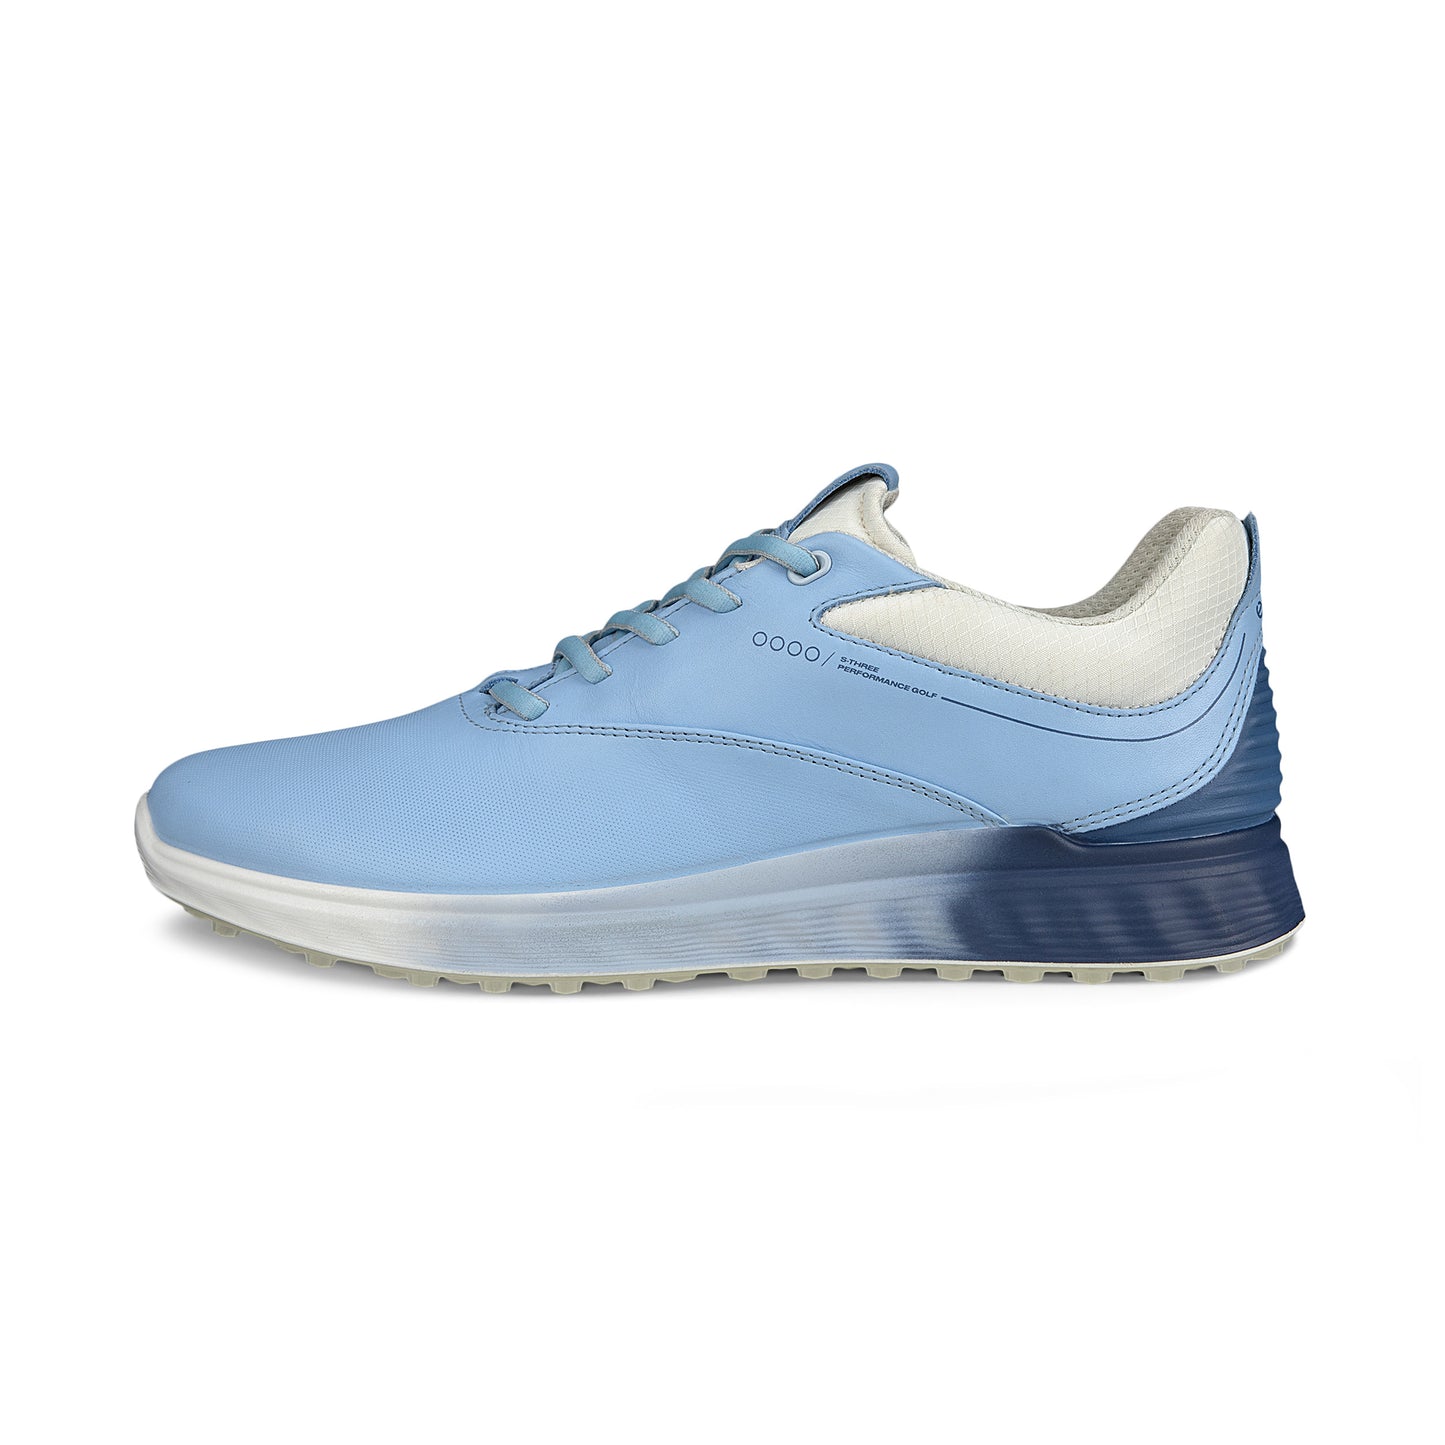 ECCO Womens S-Three Golf Shoe with GORE-TEX in Bluebell/Retro Blue